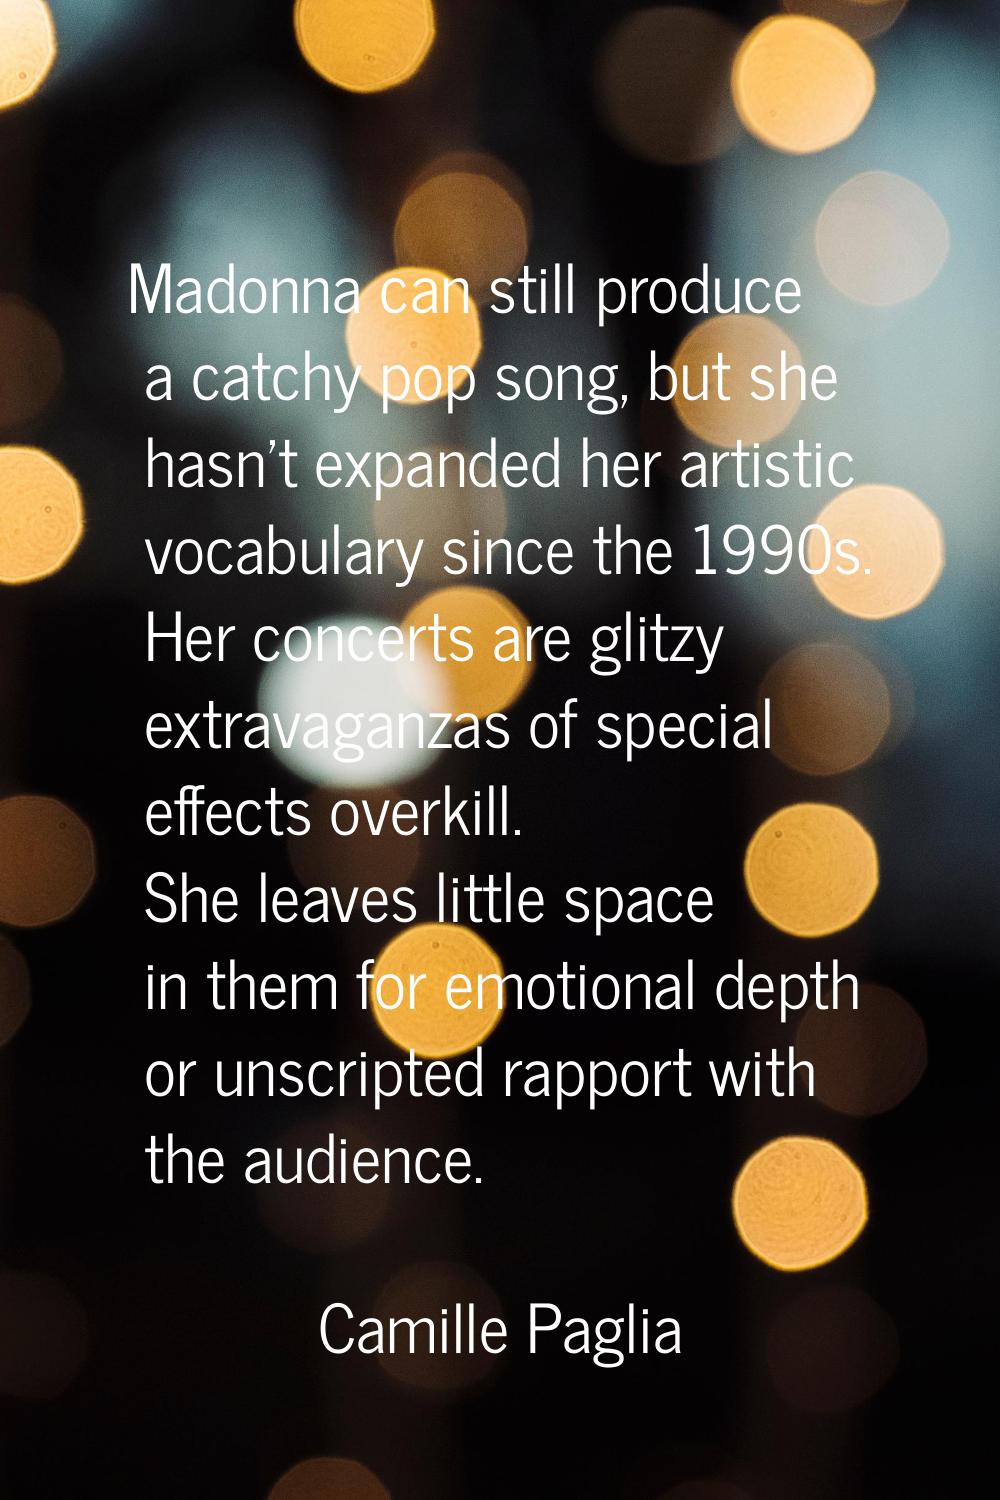 Madonna can still produce a catchy pop song, but she hasn't expanded her artistic vocabulary since 